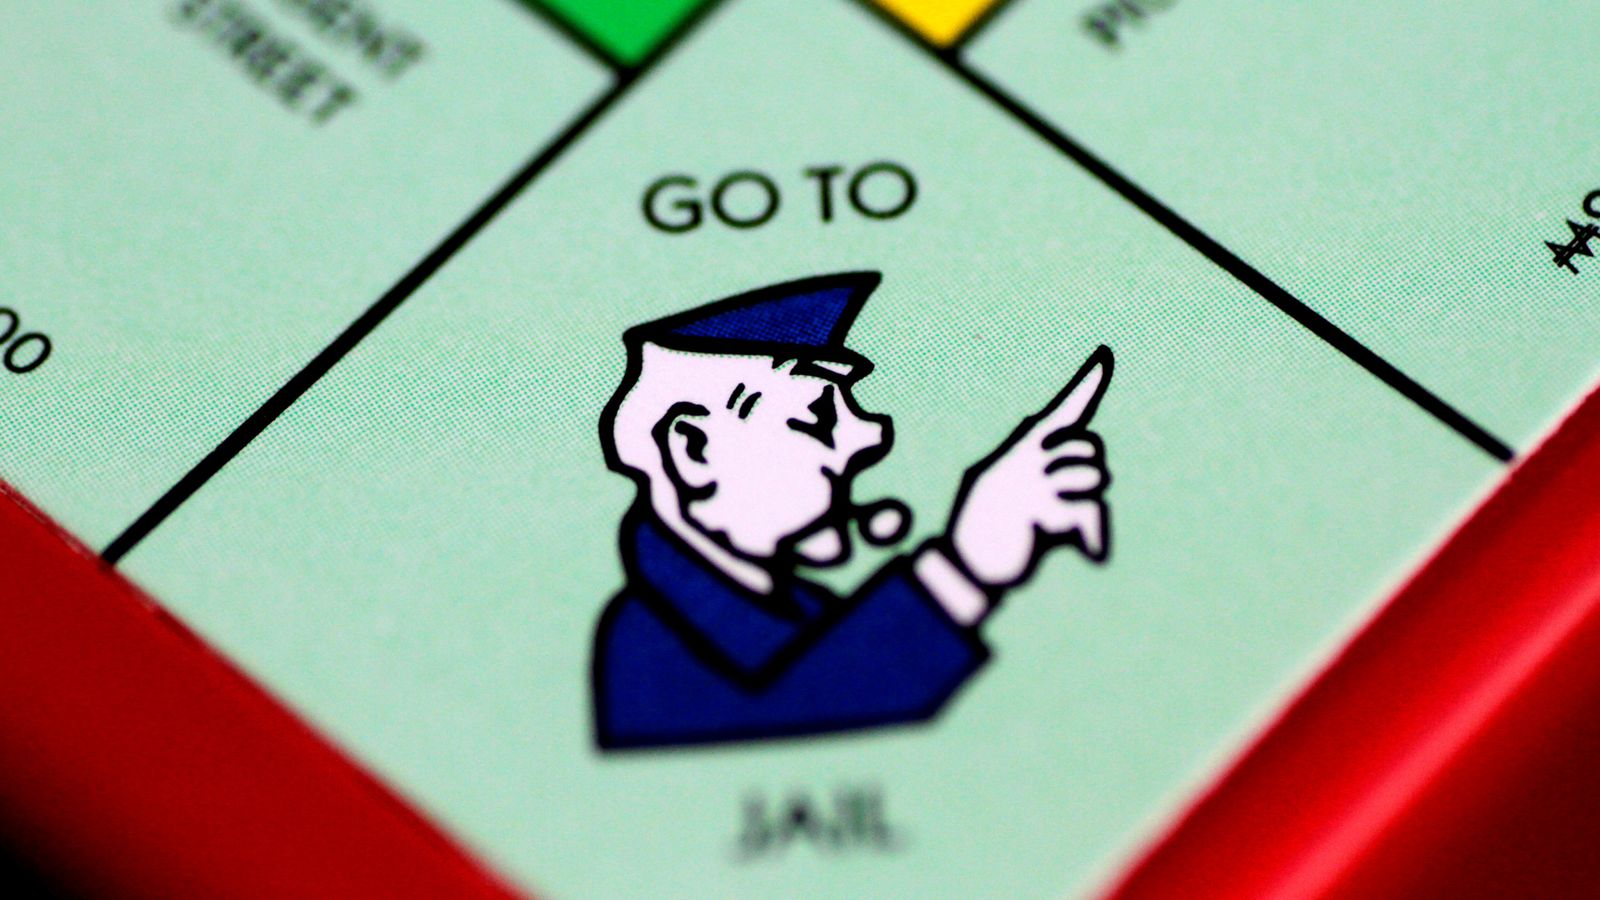 Brussels Monopoly game row 'ends in samurai swordfight' with man said to be fighting for his life